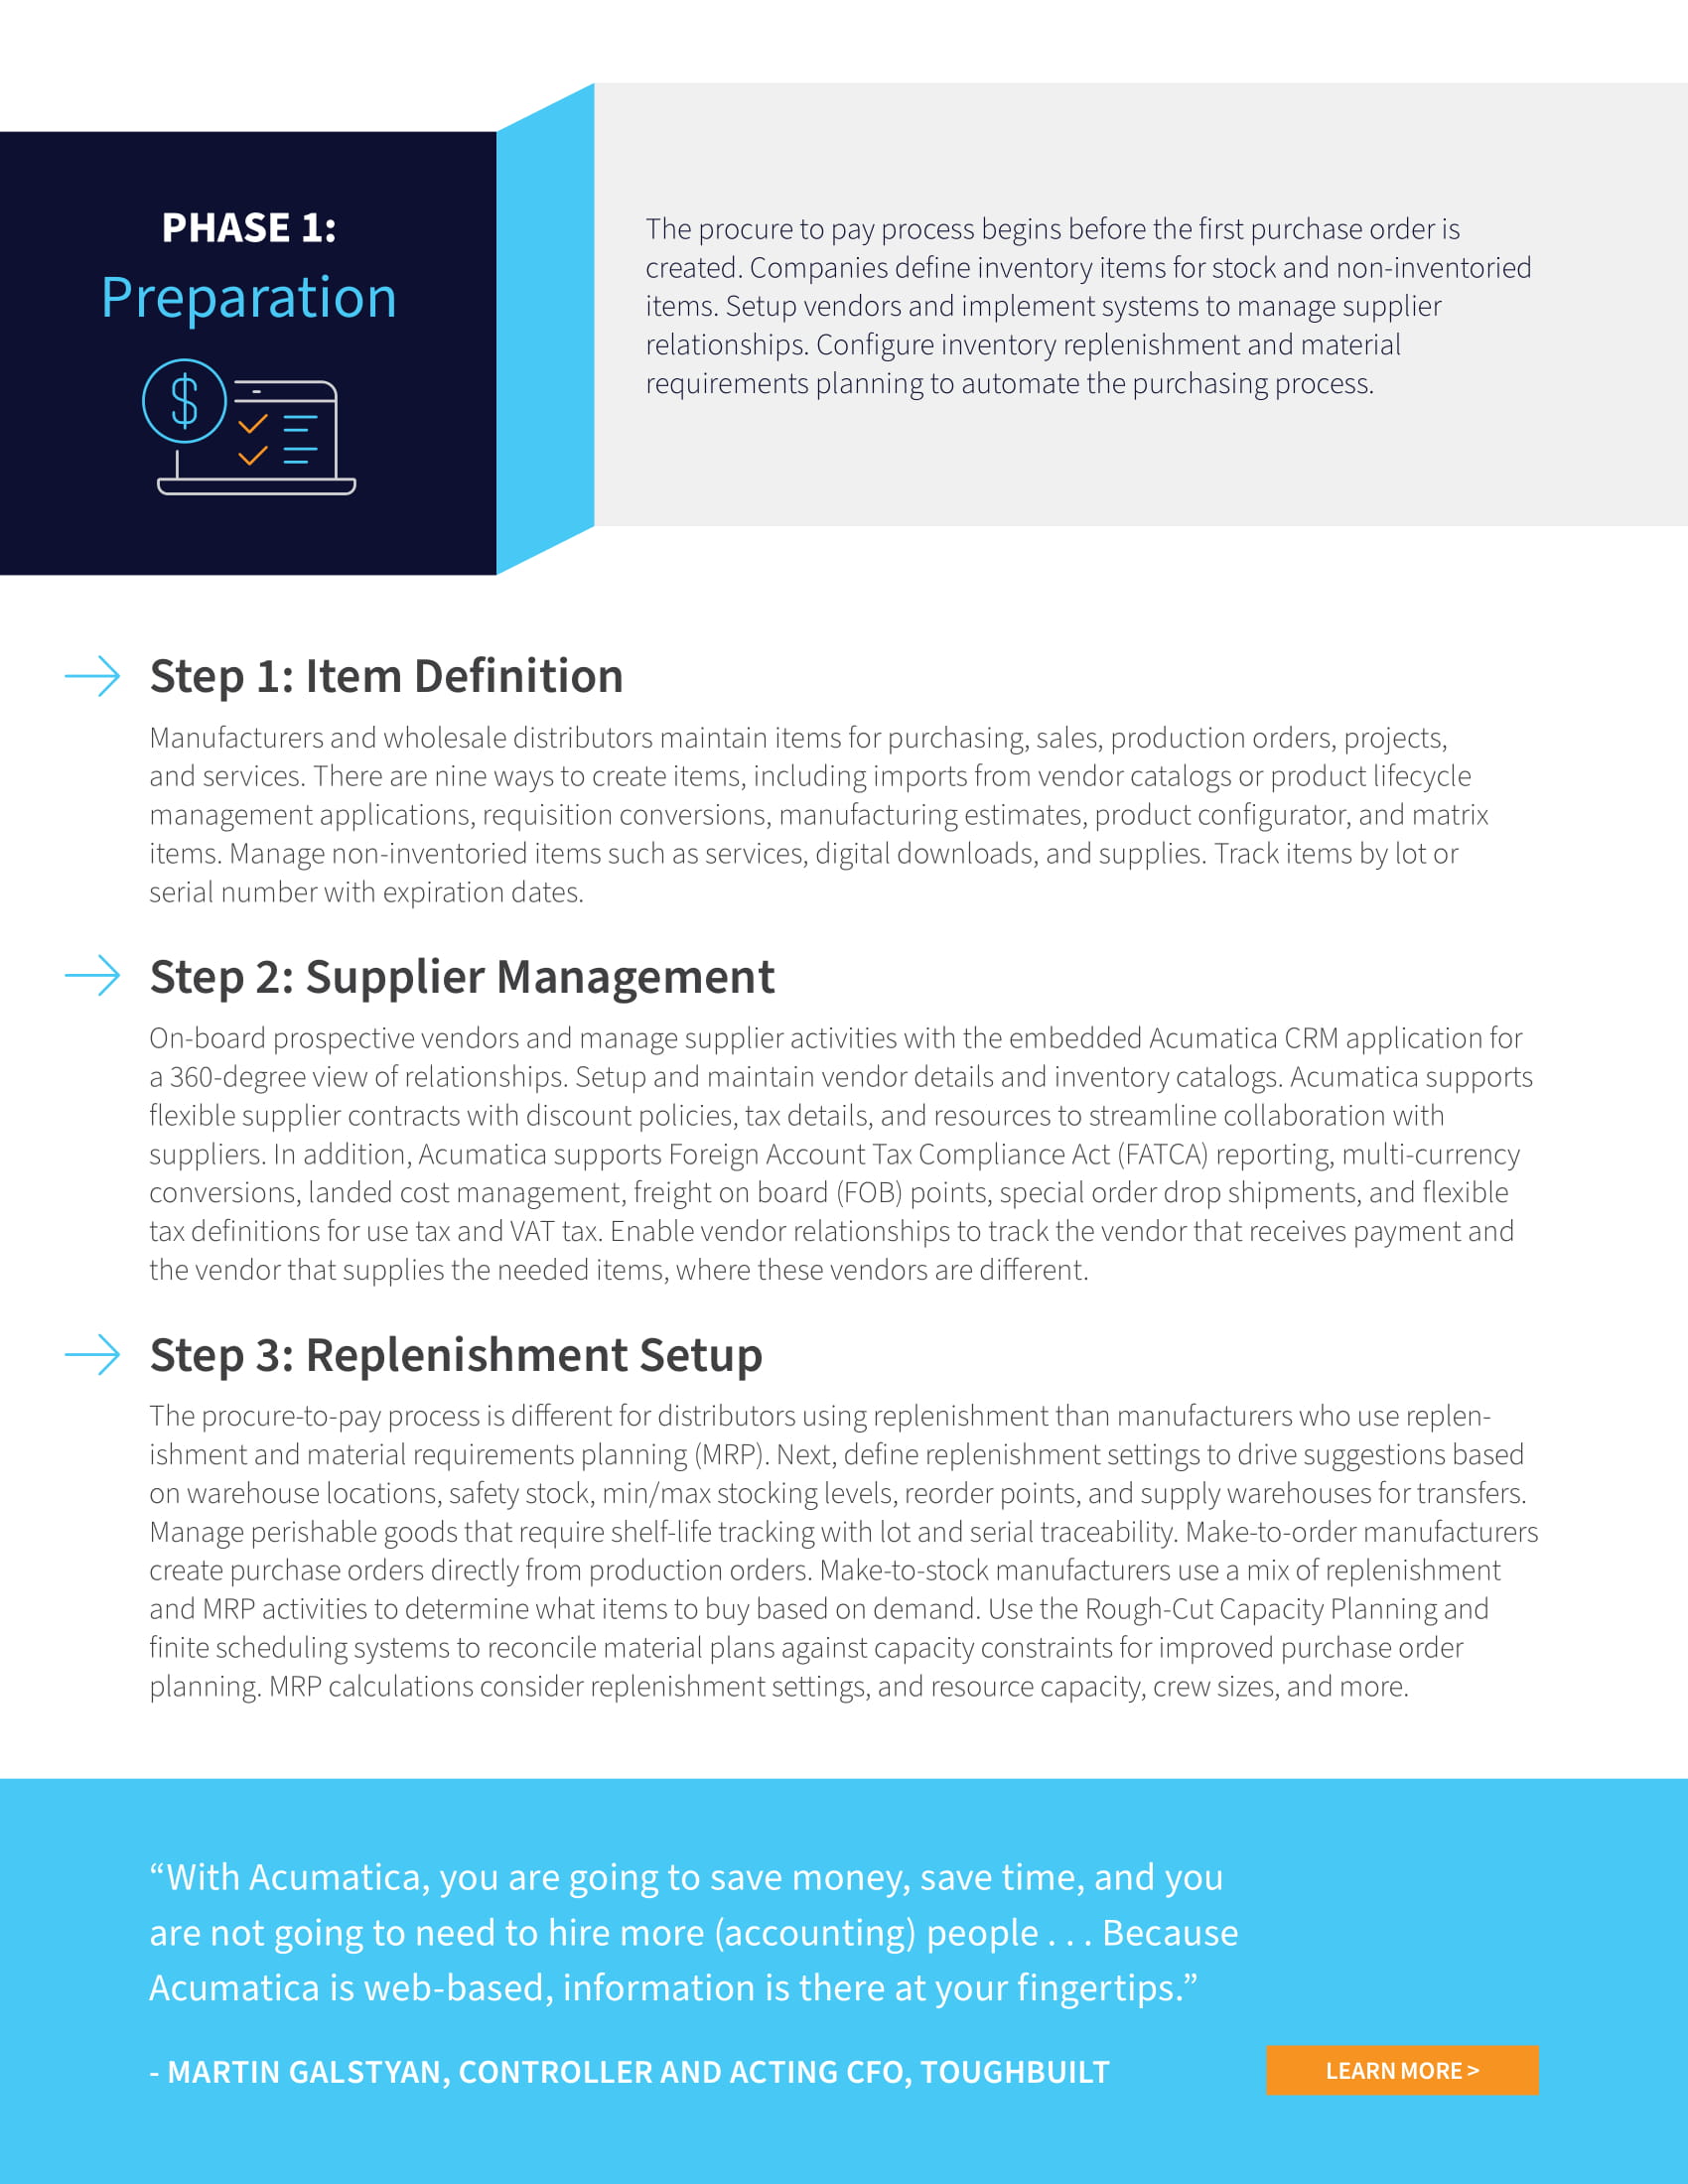 Procure-to-Pay (P2P) Automation: How to Get Started, page 1